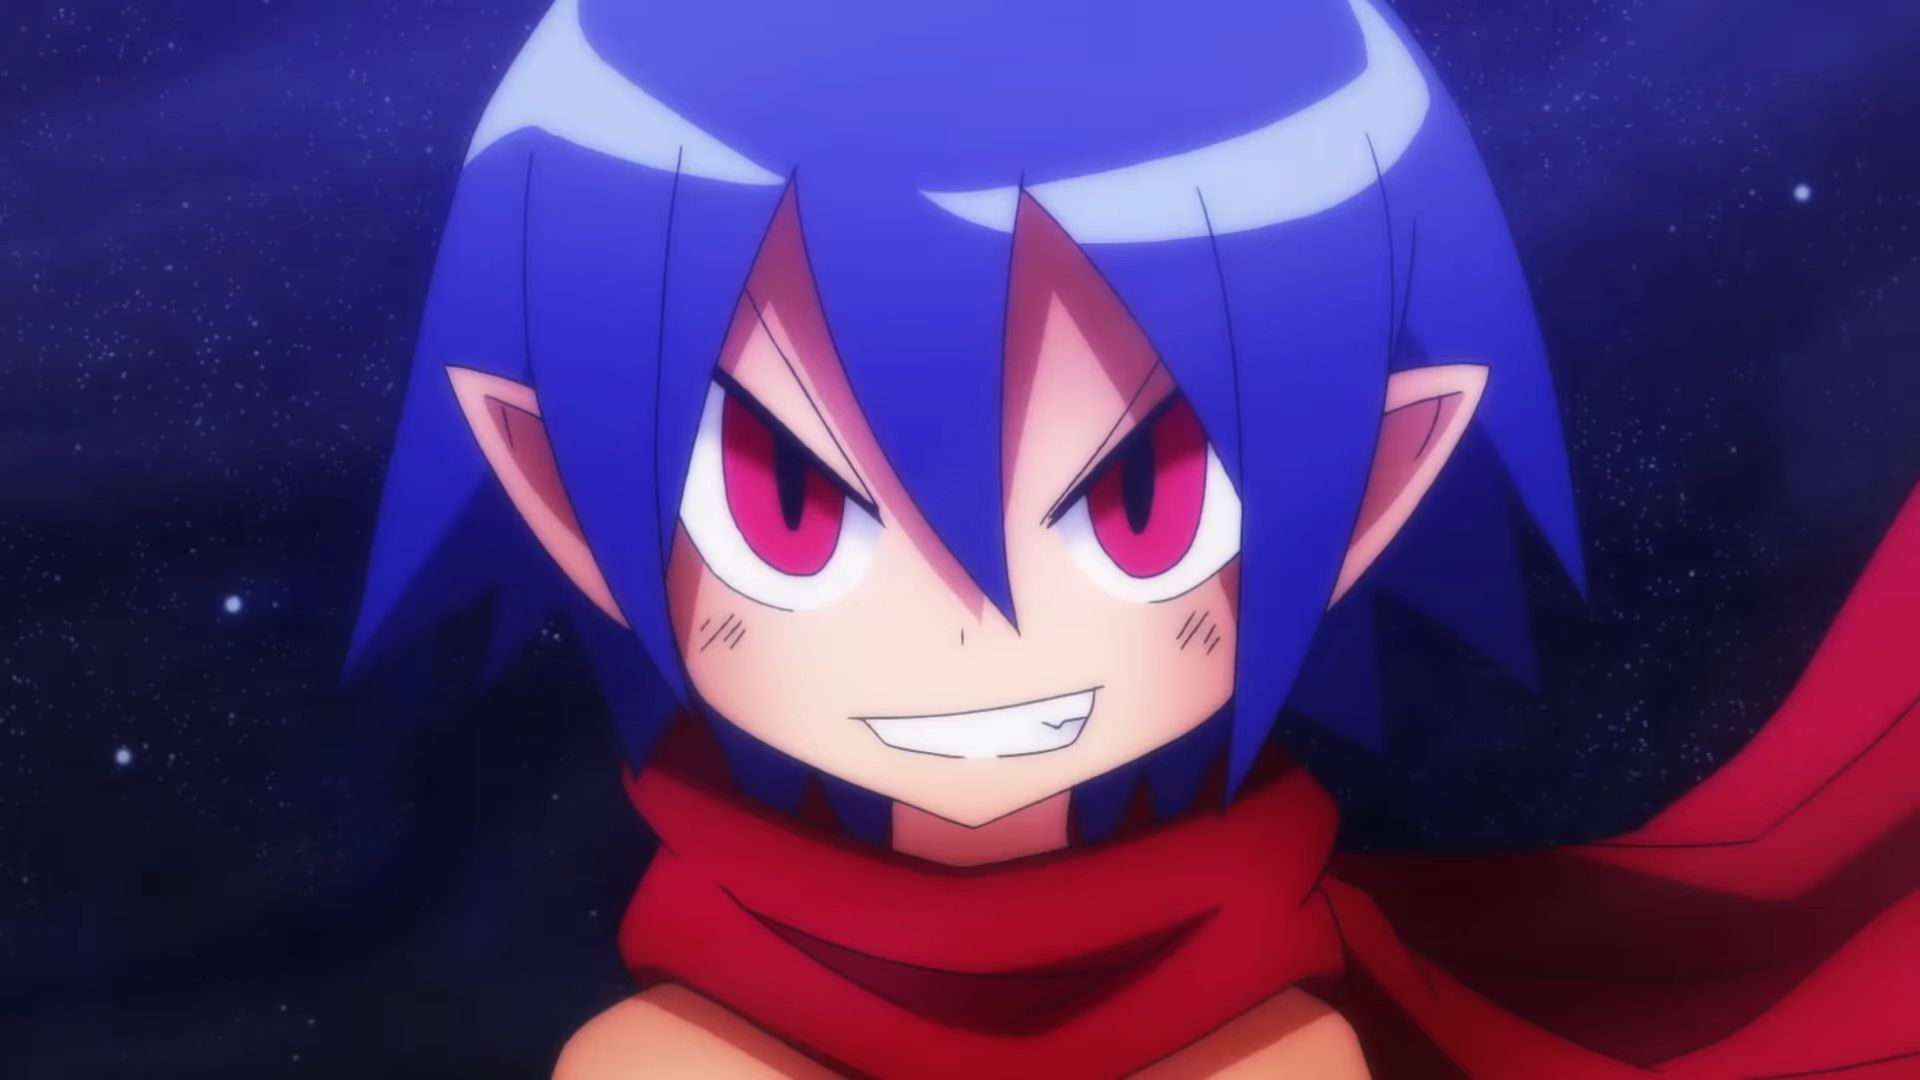 Sony S Disgaea Rpg For Mobile Shows First Gameplay Footage Story